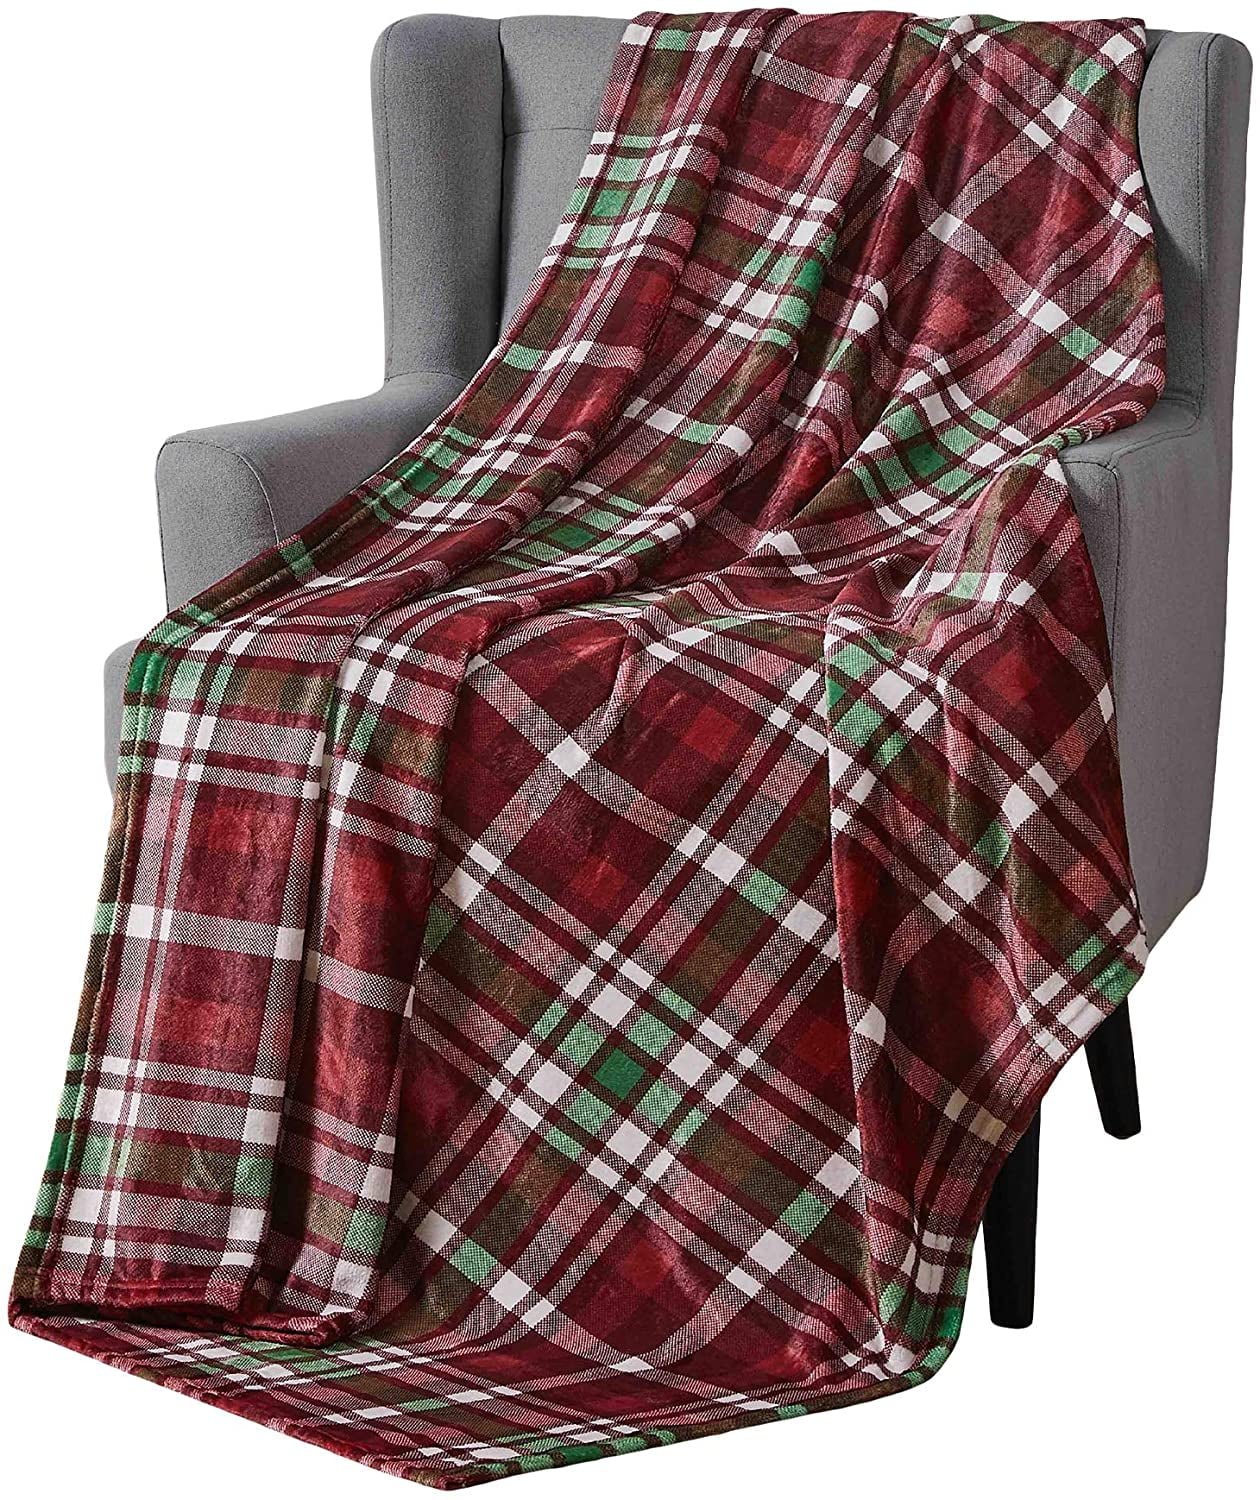 Brown The Lakeside Collection Plaid Plush Throw Blanket with Included Gift Bag for Giving